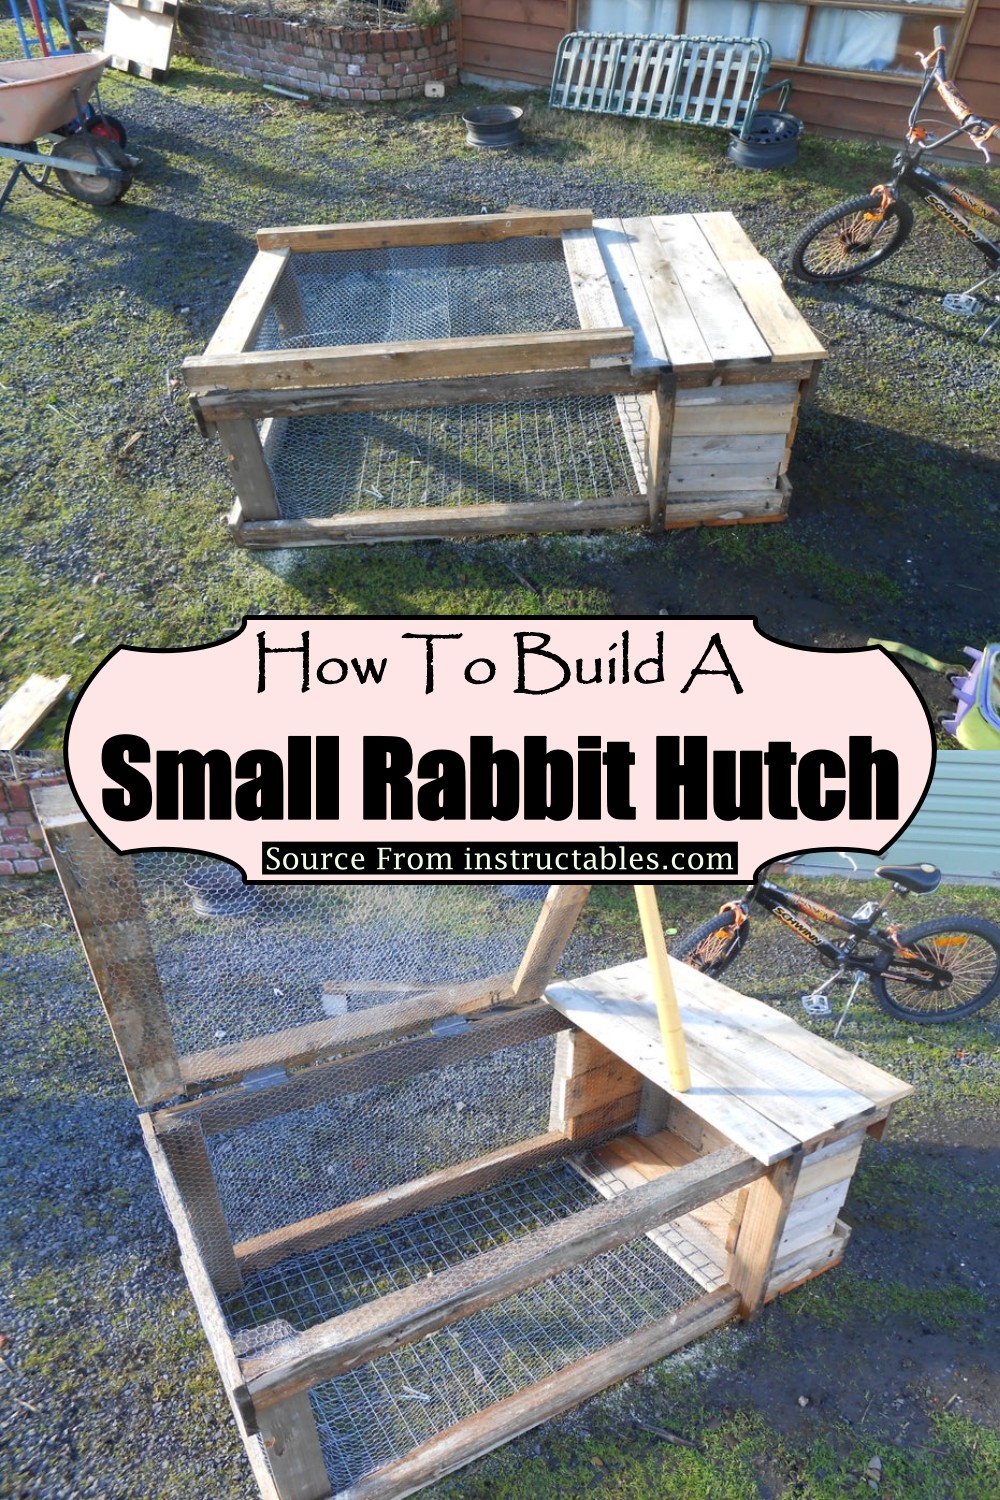 How to Build a Small Rabbit Hutch